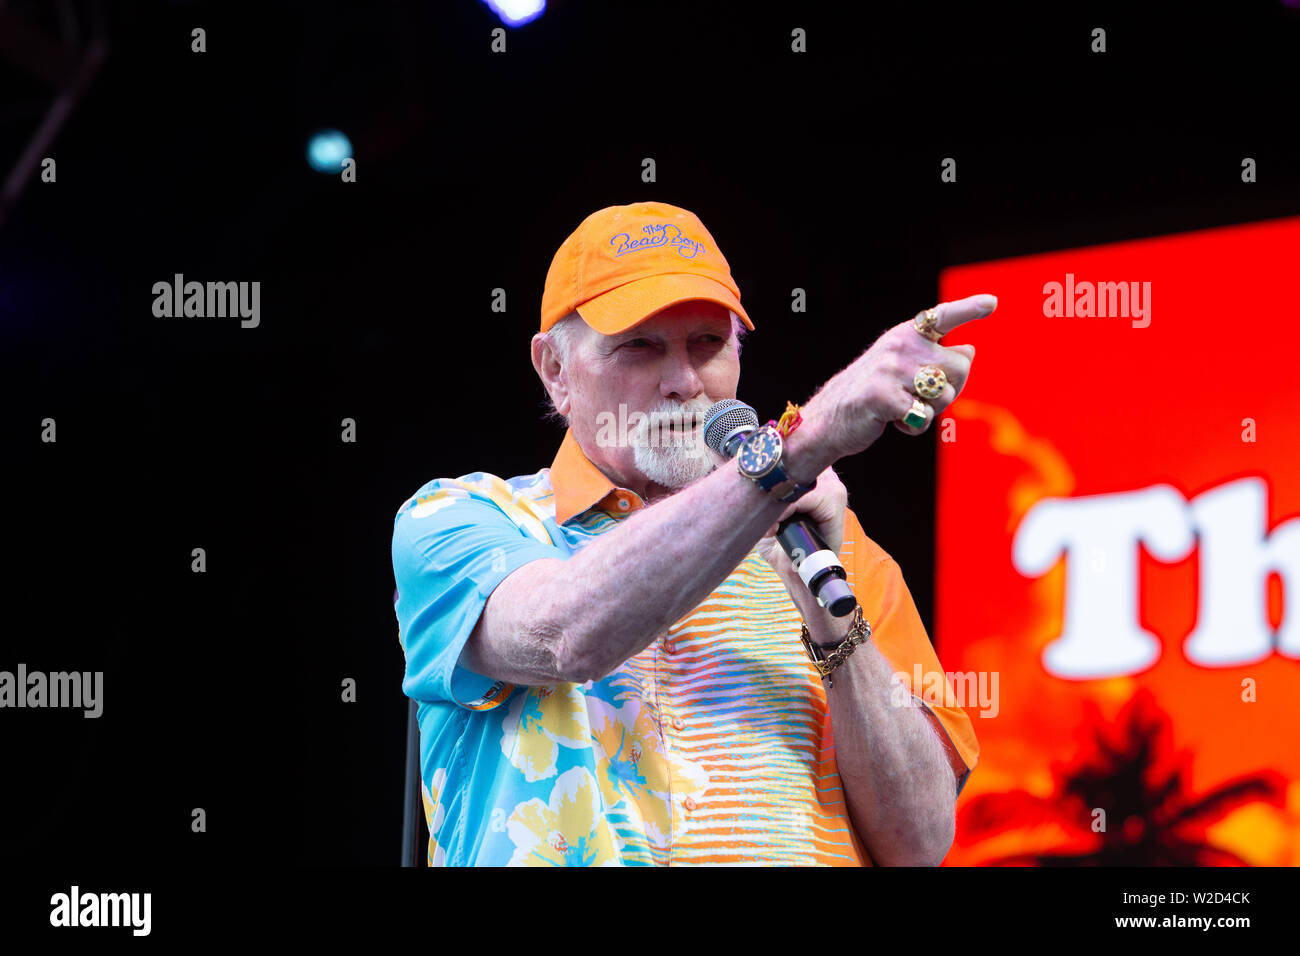 The Beach Boys perform live at the 2019 Cornbury Festival, Great Tew, Oxfordshire. The Beach Boys are an American rock band. Stock Photo